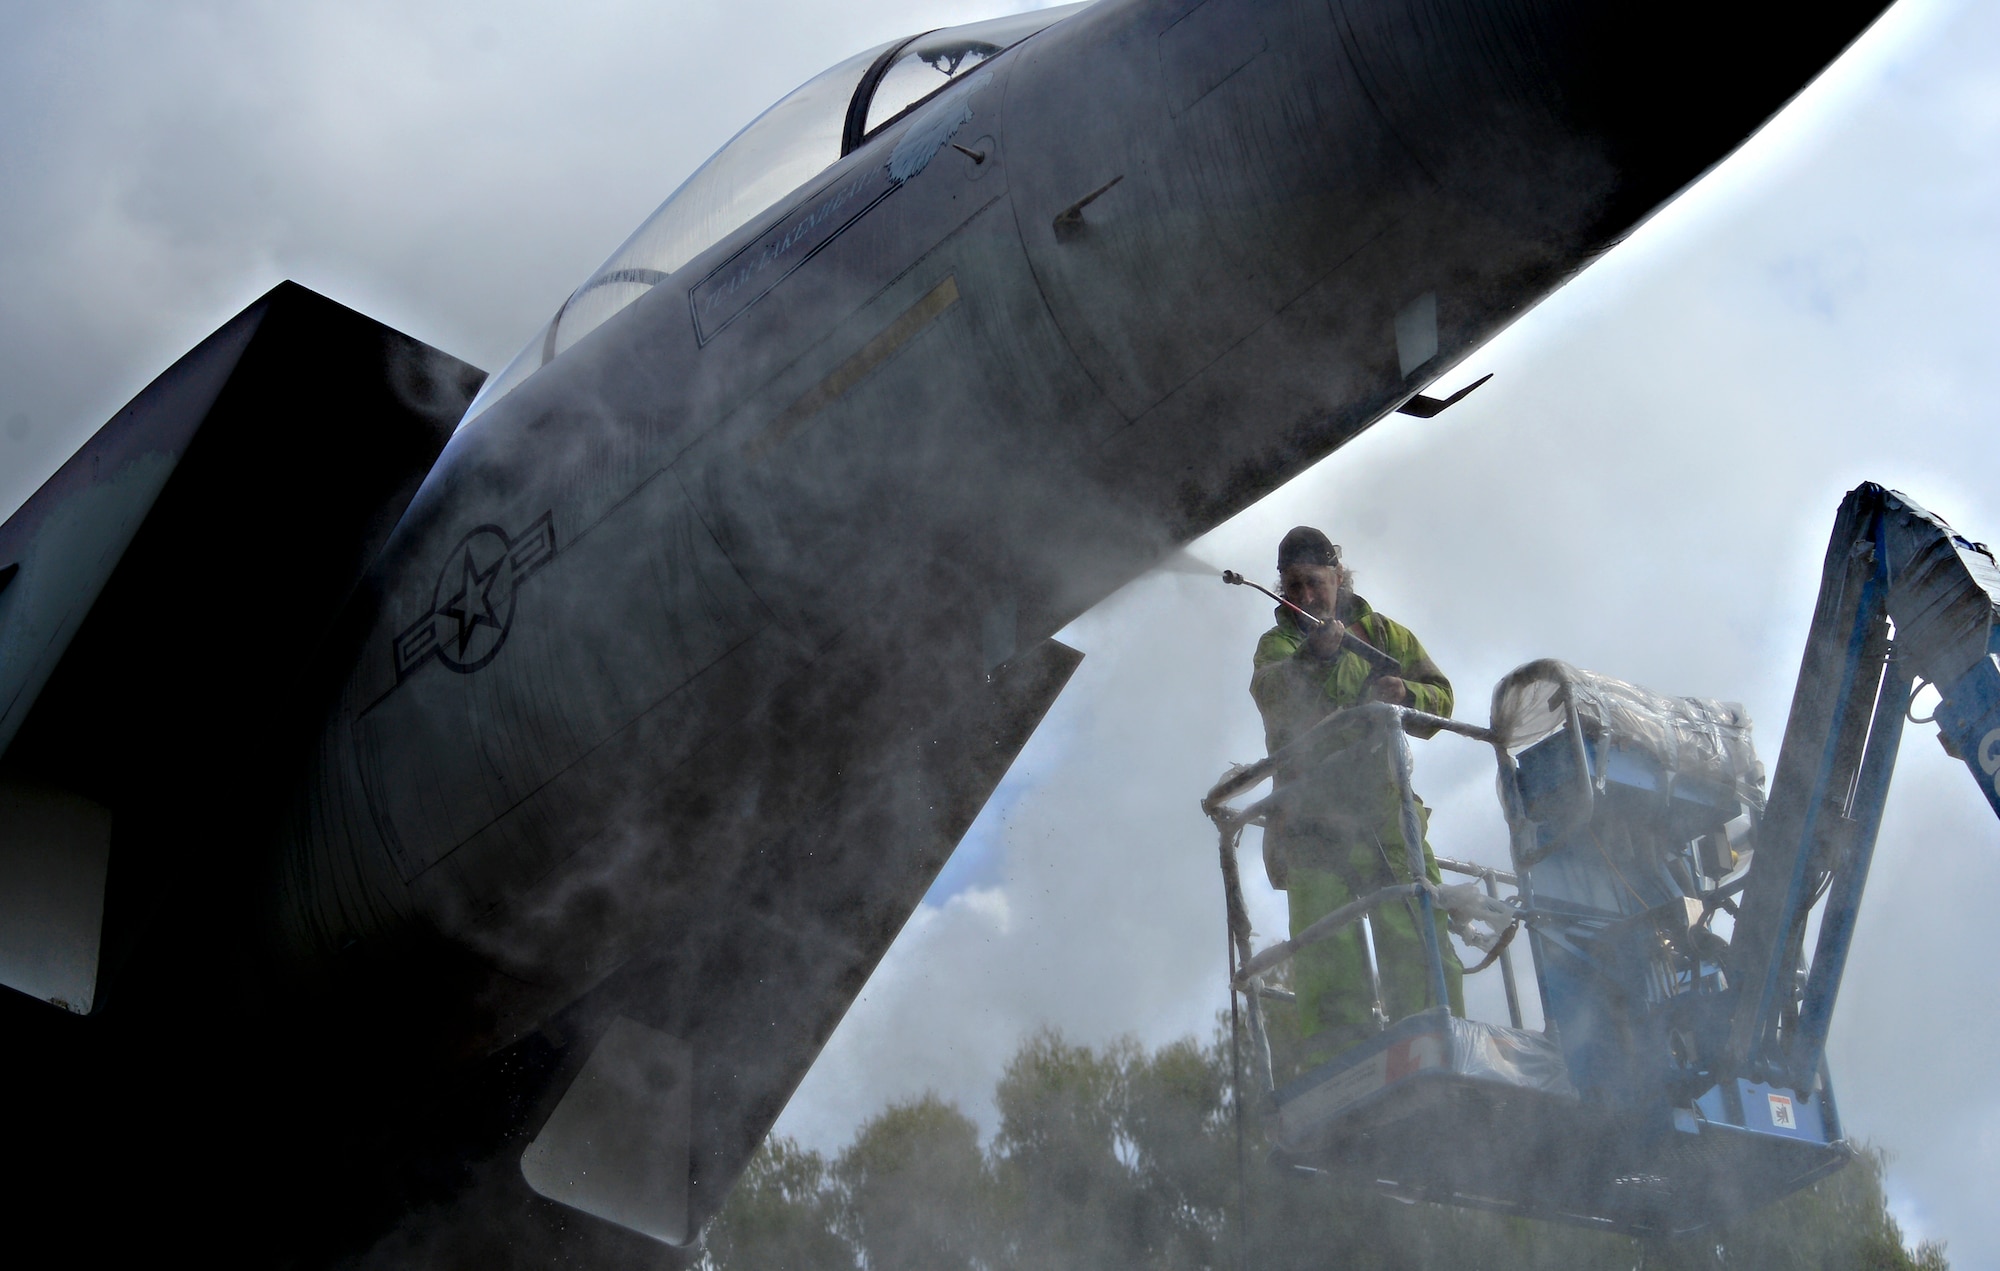 Workers from Fangeos Painting and Decorating Contractors in Essex pressure wash the static displays before repainting them at Royal Air Force Lakenheath, England, July 22, 2015. Working with the local community is vital in accomplishing the mission of the 48th Fighter Wing. (U.S. Air Force photo by Senior Airman Erin Trower/Released) 